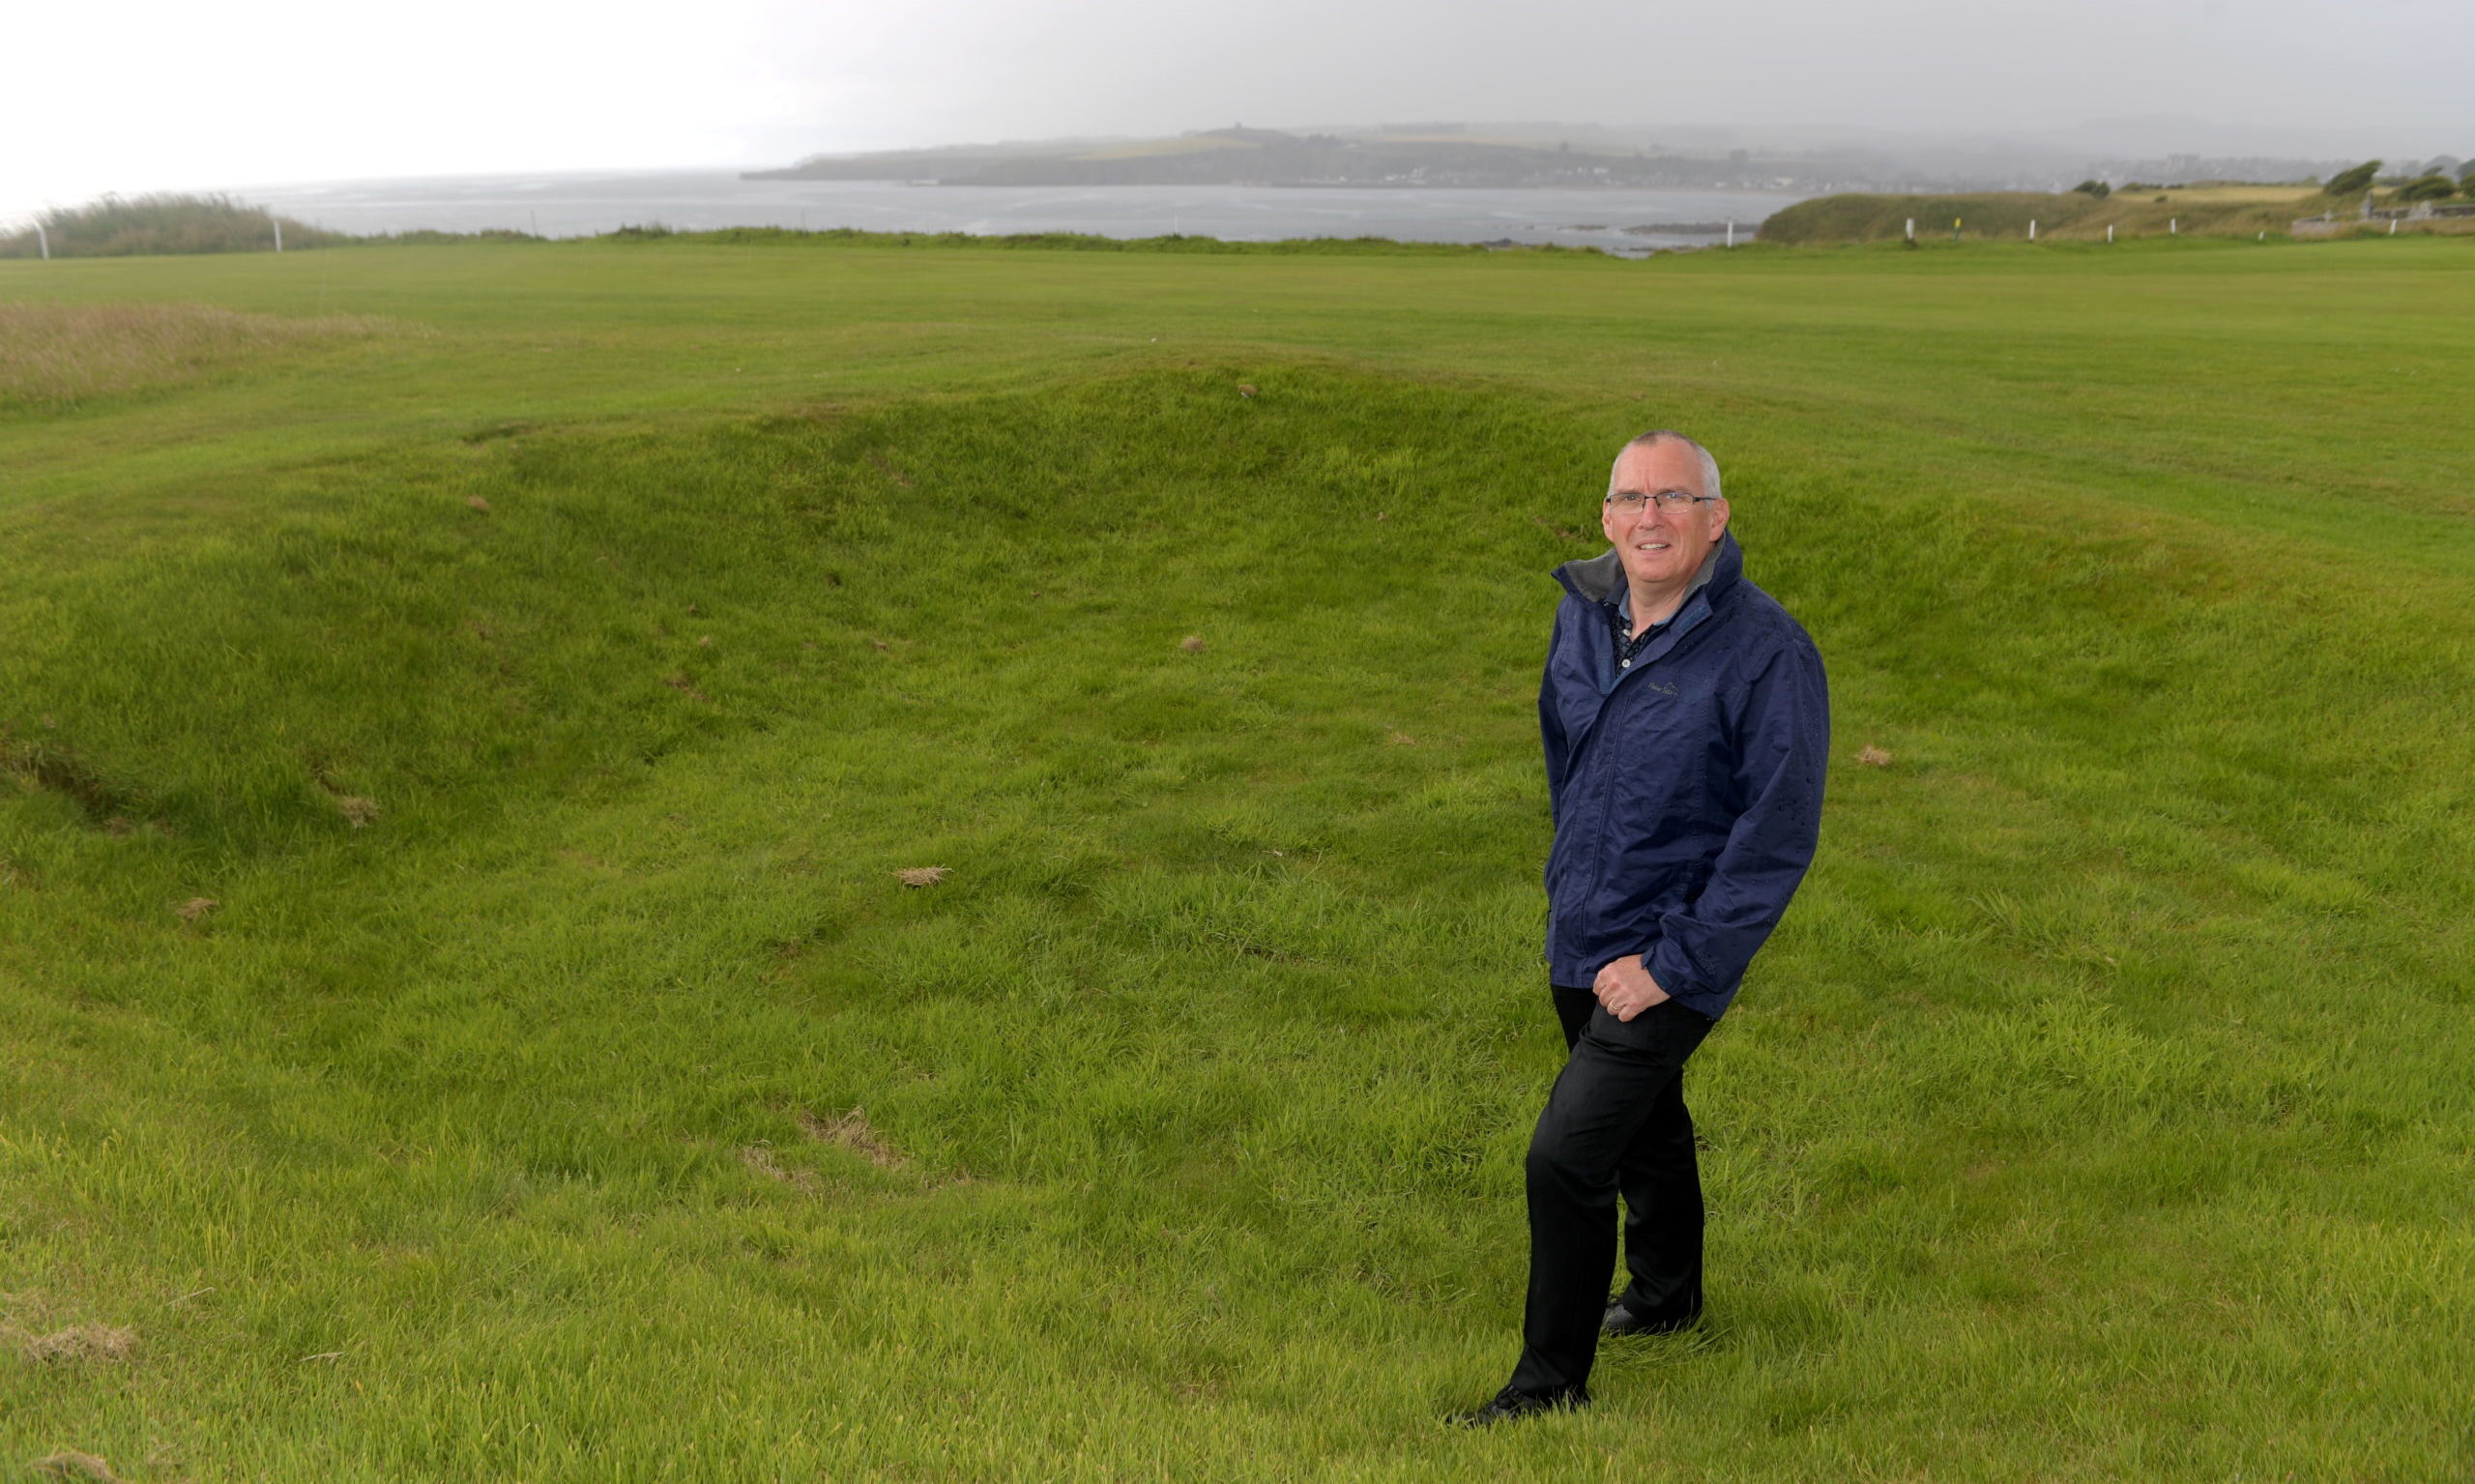 Locator of Stonehaven Golf Course and the views across the bay. Club manager Stewart Kerr standing in Hitler's Bunker, the remnants of a crater left by a World War 2 bomb between the first and second fairways of the course. CR0022503
20/07/20
Picture by KATH FLANNERY